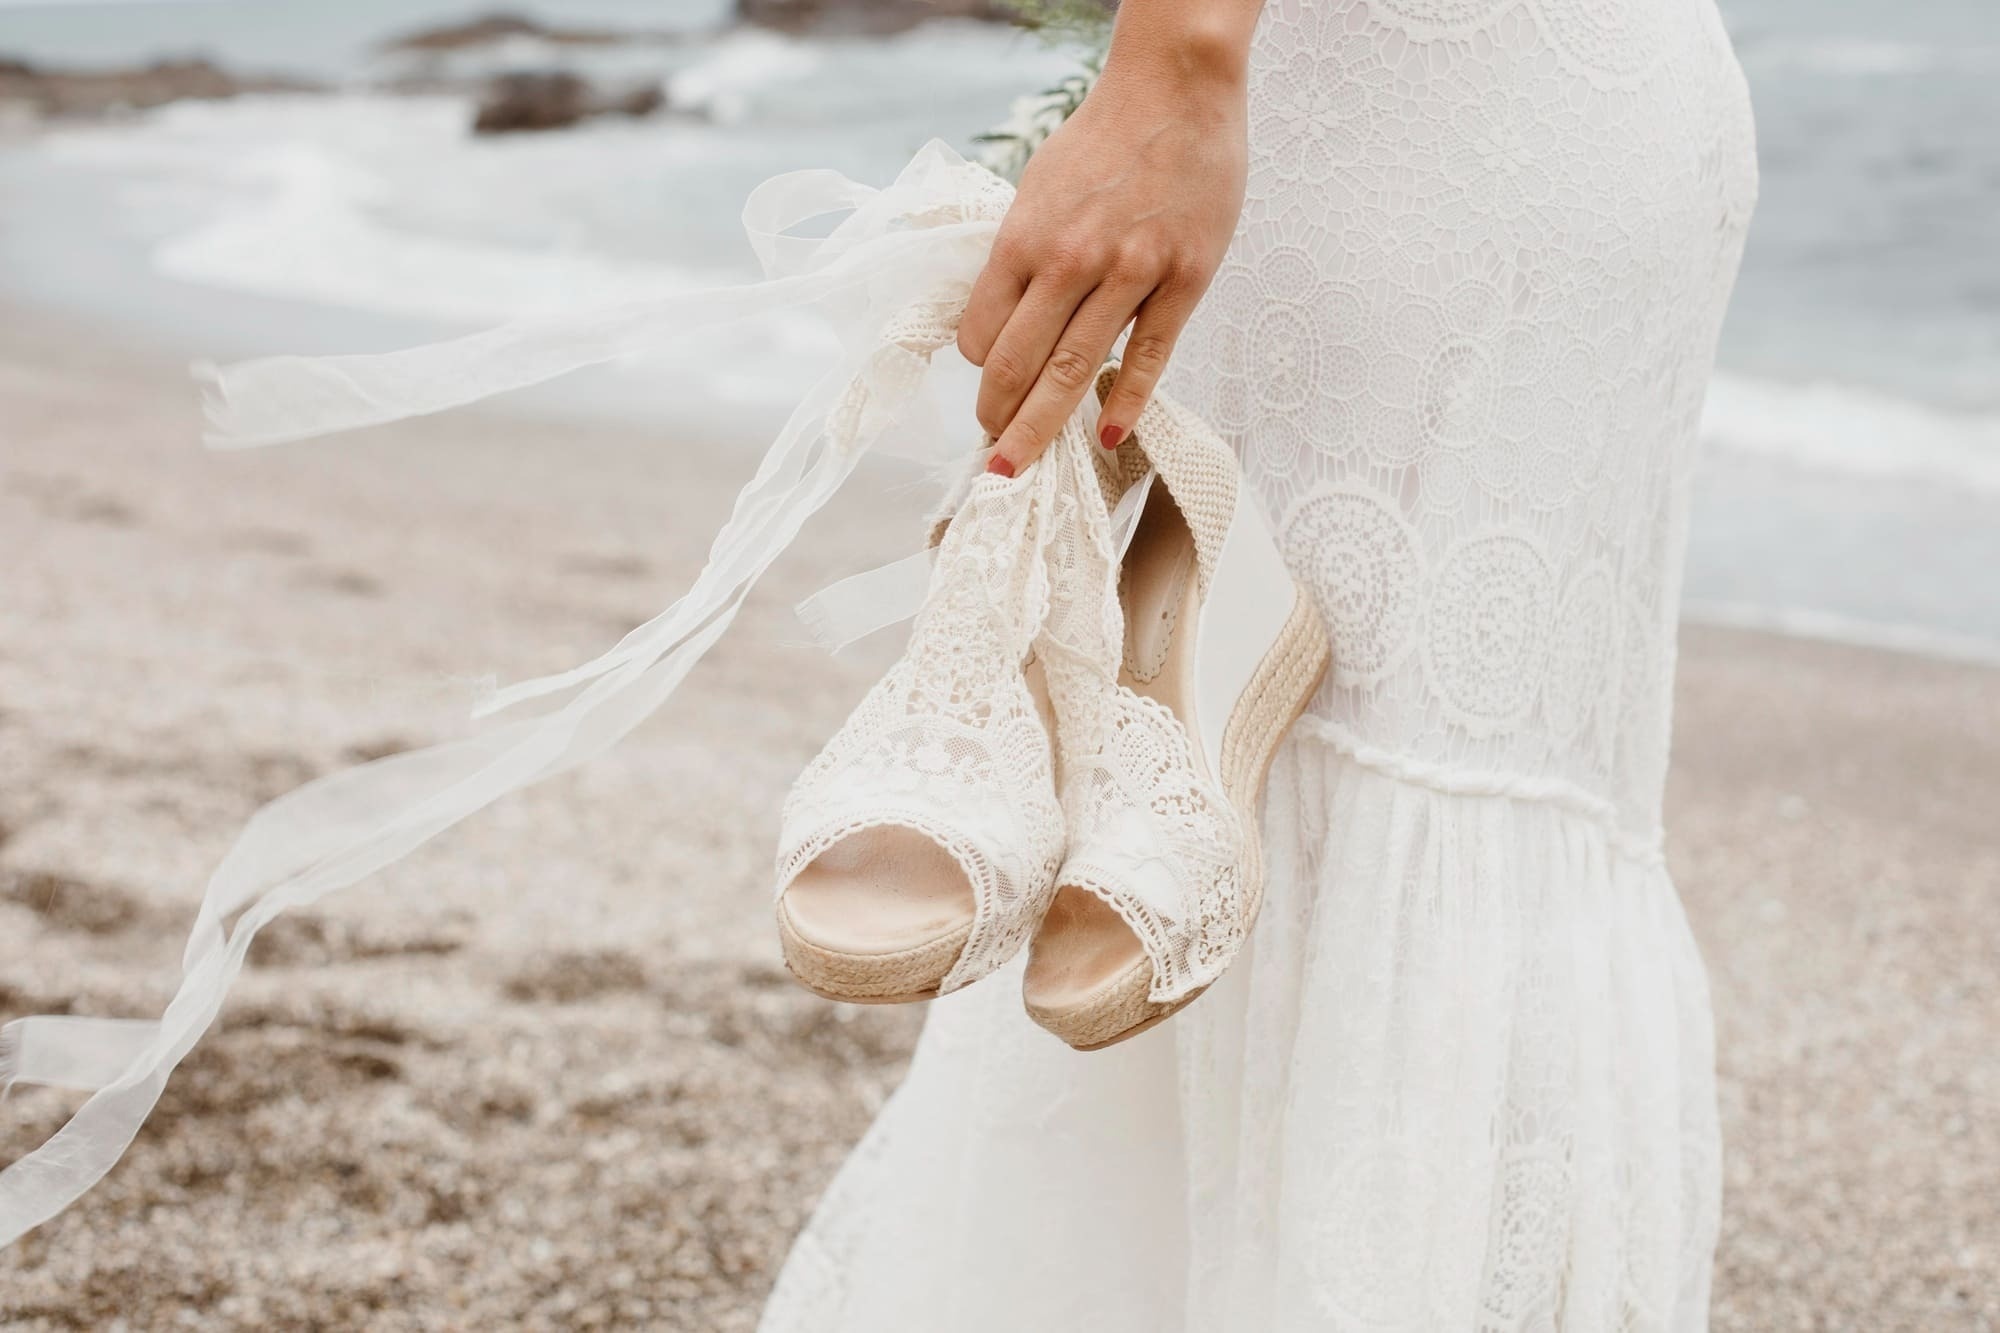 A different wedding wear sandals to celebrate your wedding